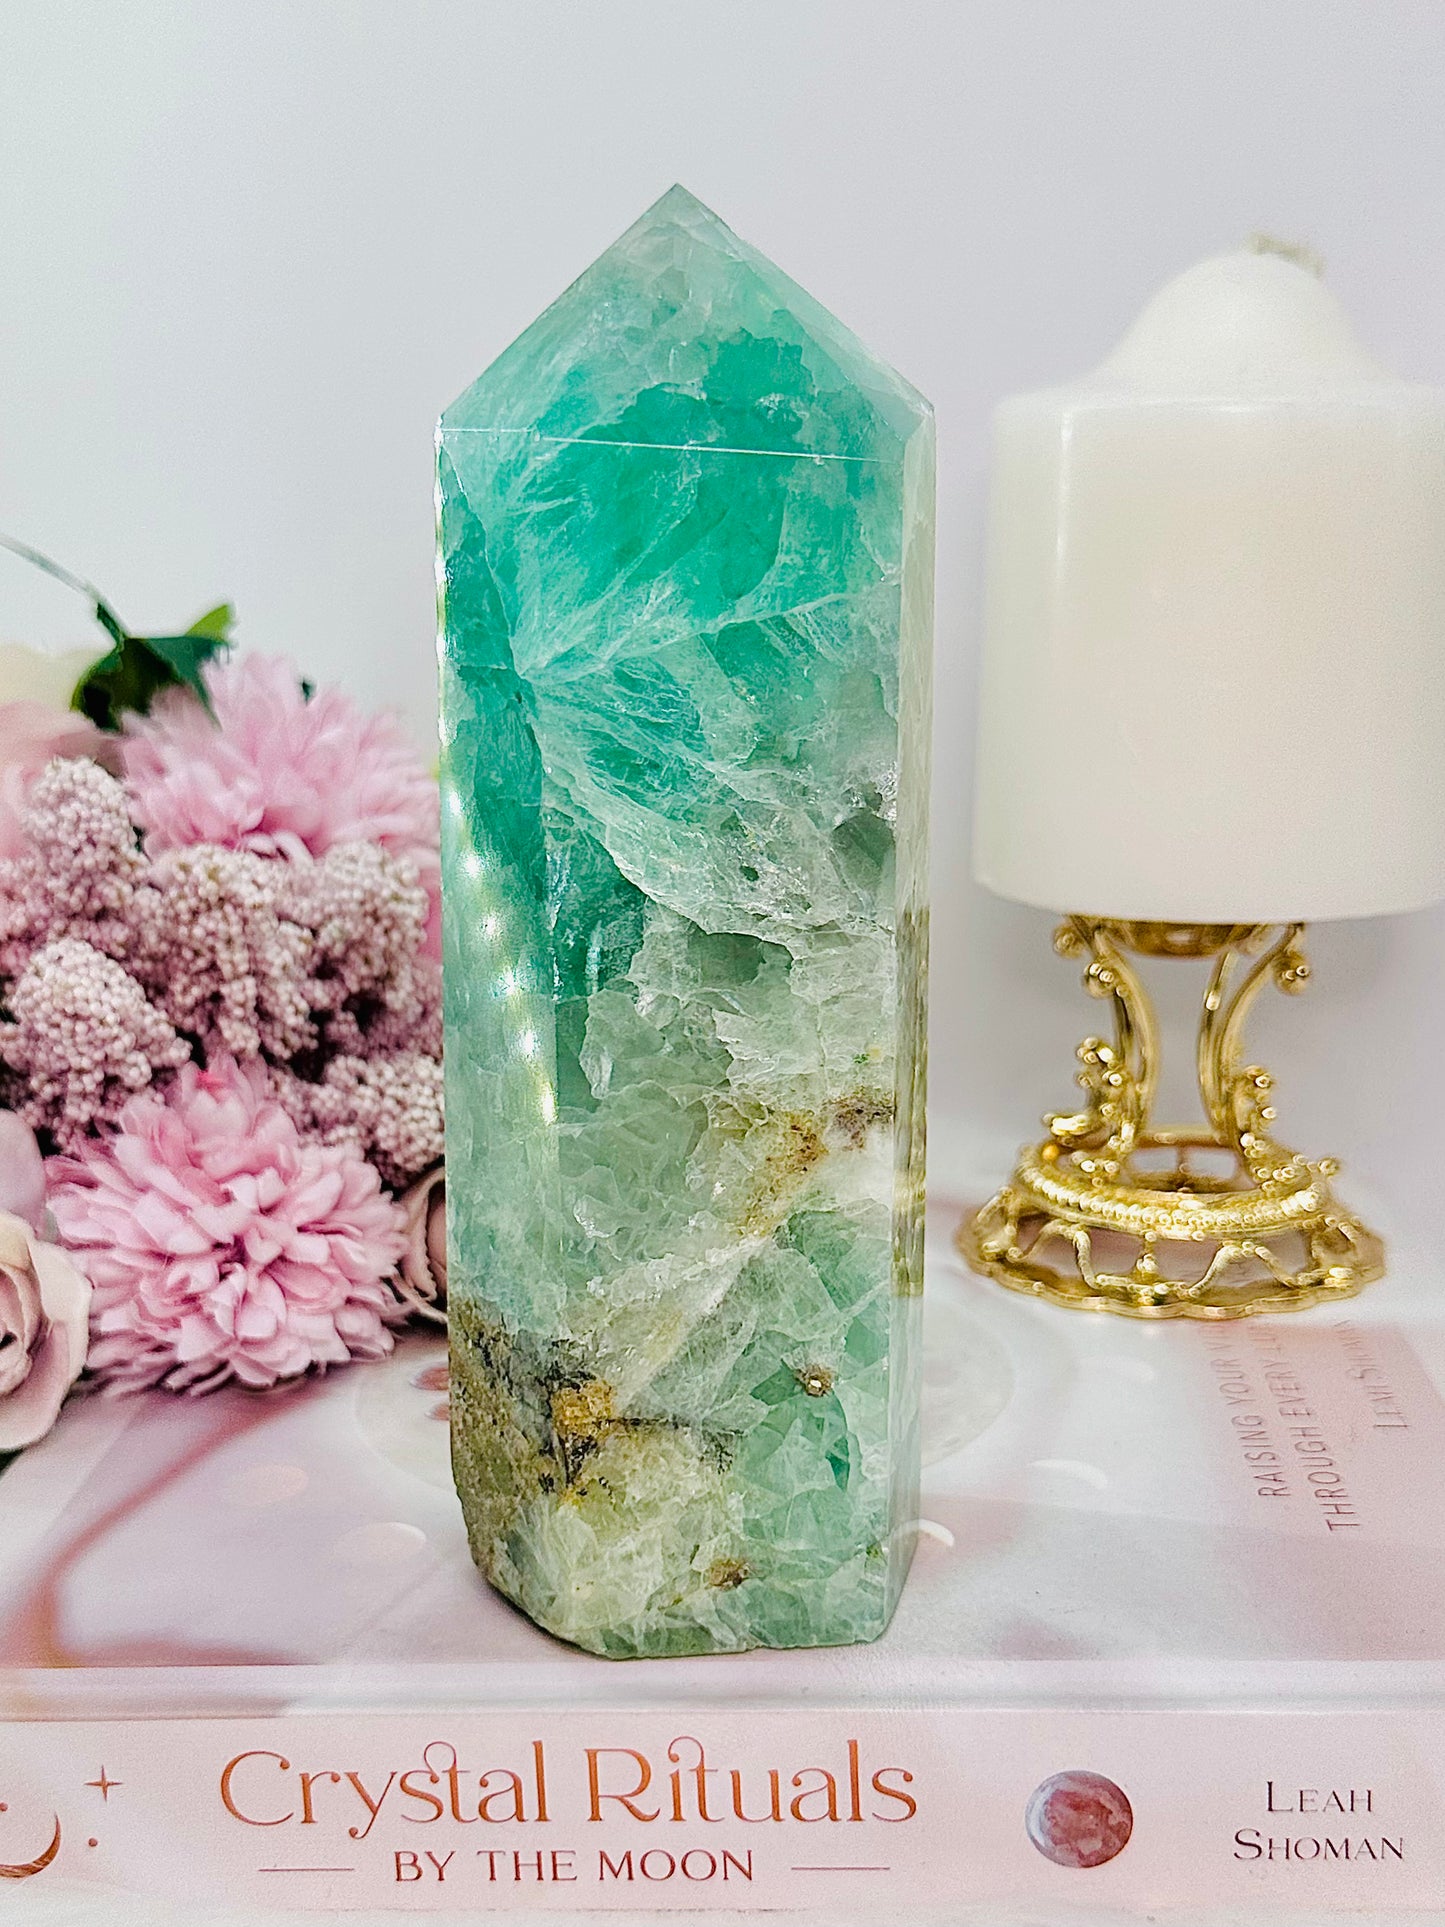 Fabulously Stunning Large Chunky Green Fluorite Tower 906grams ~ A Truly Amazing Piece